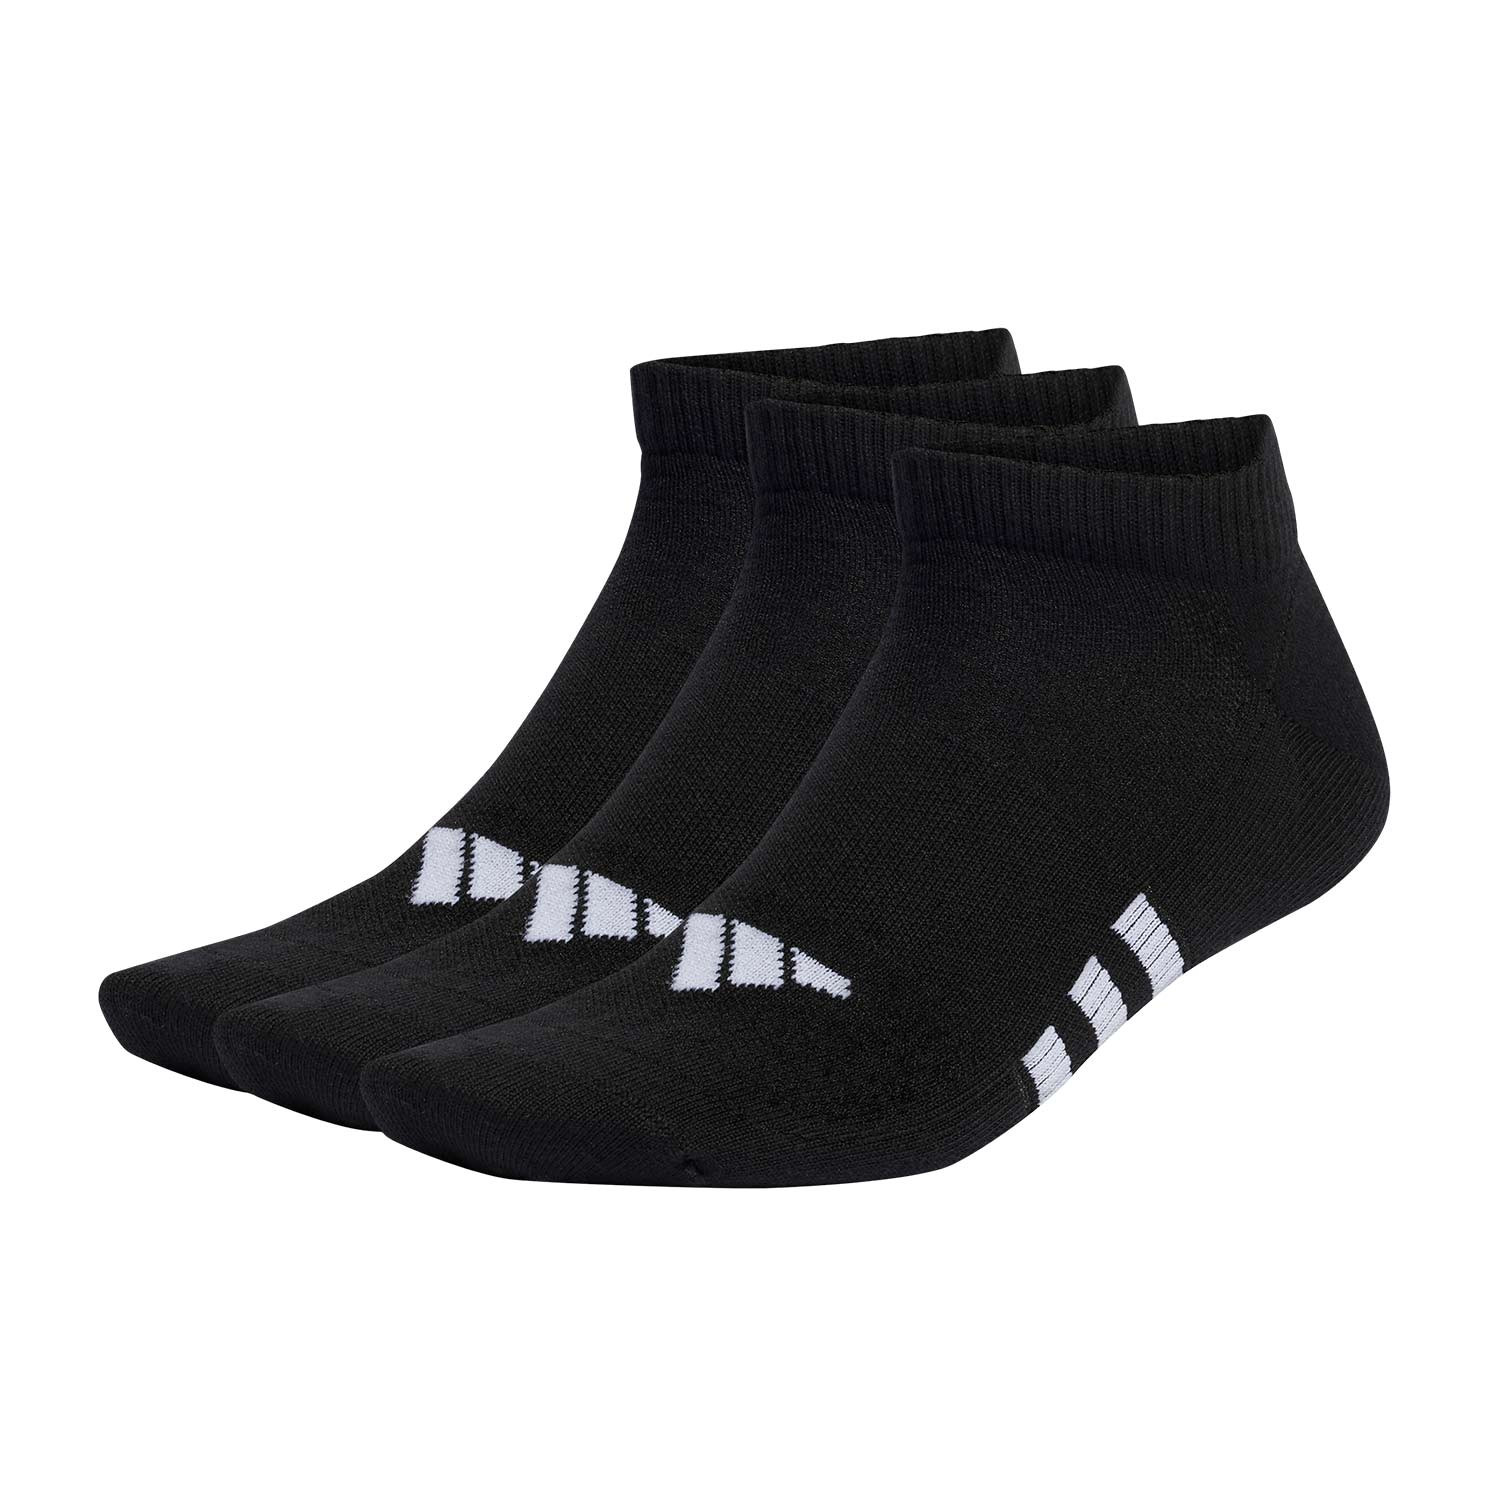 Calcetines Deportivos Invisibles Mujer Negros Pack 5